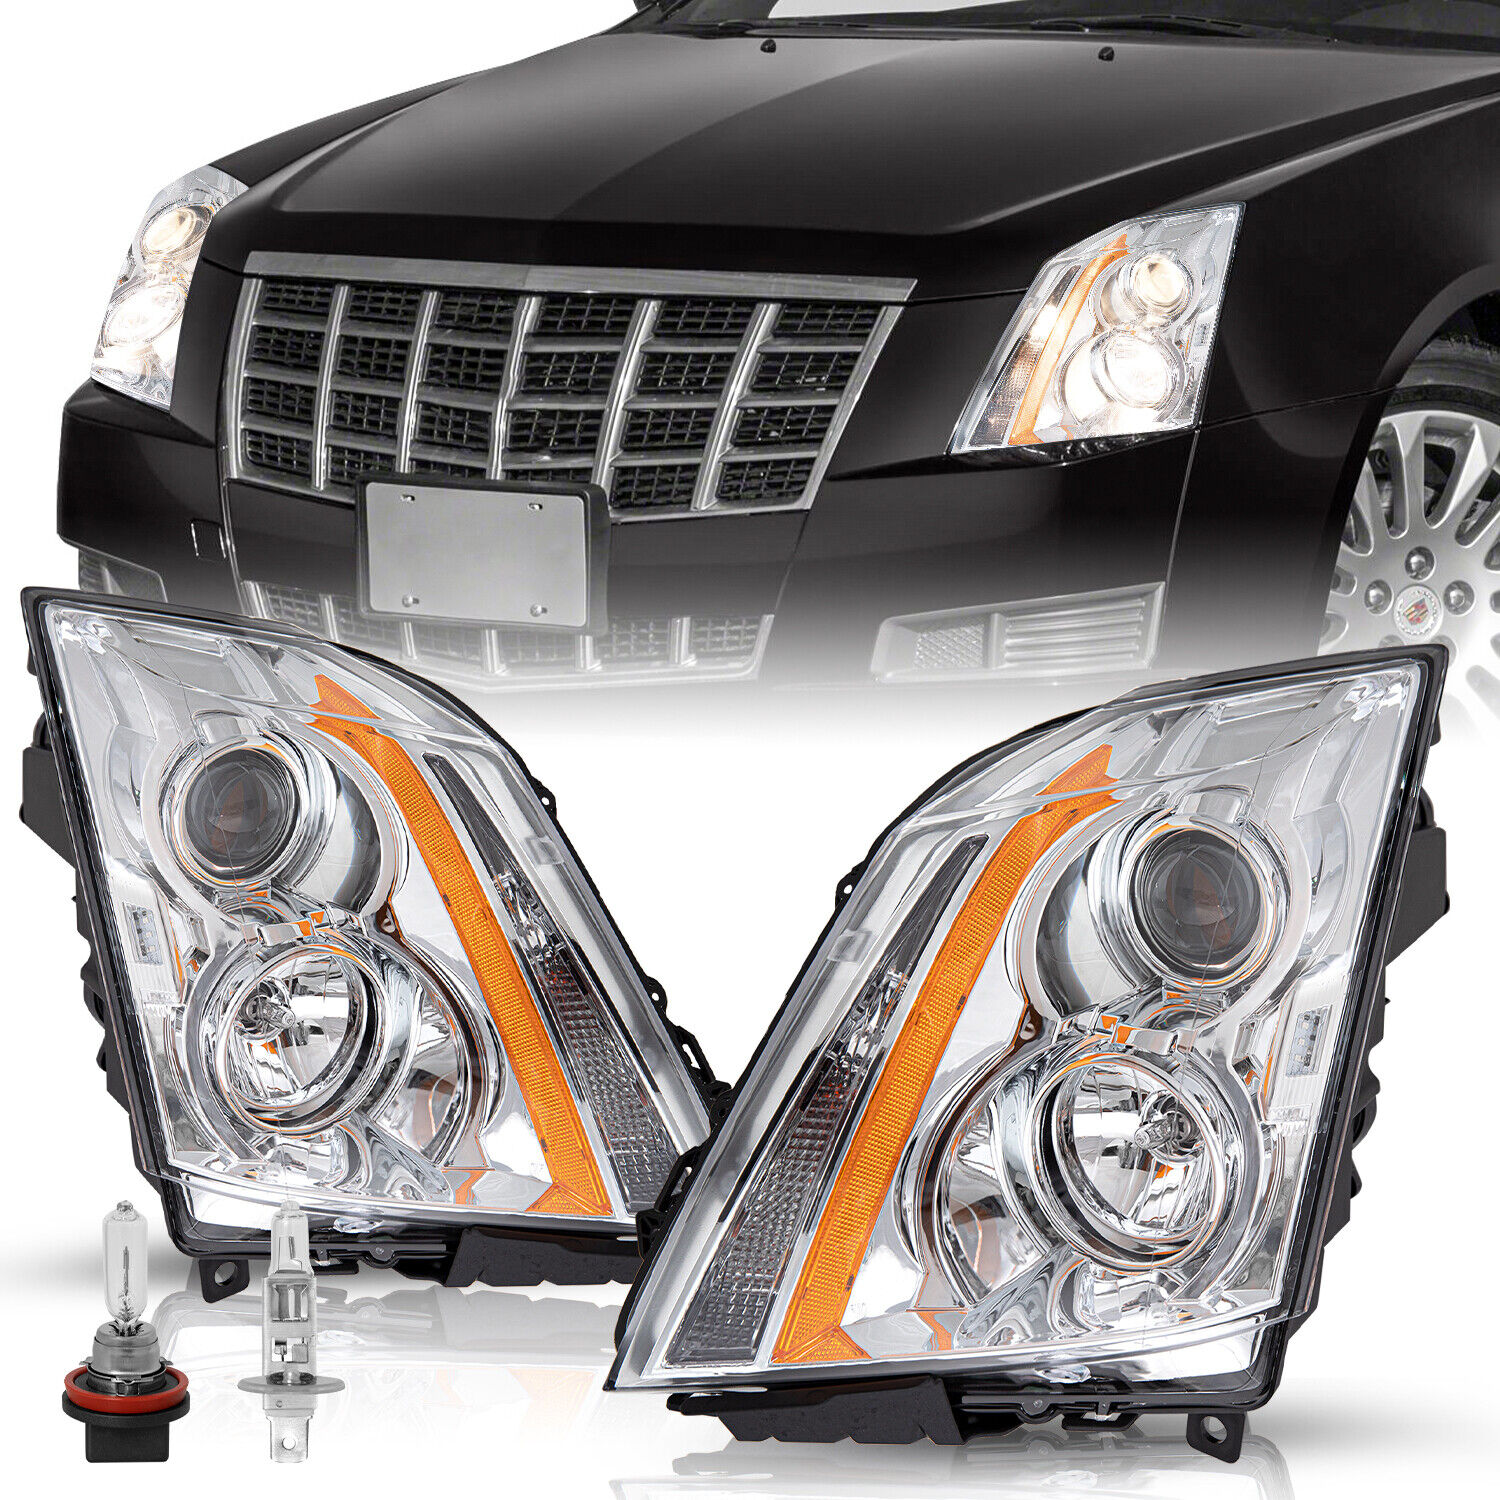 For 2008-2014 Cadillac CTS Chrome Amber Halogen Headlights Headlamps LH+RH Pair